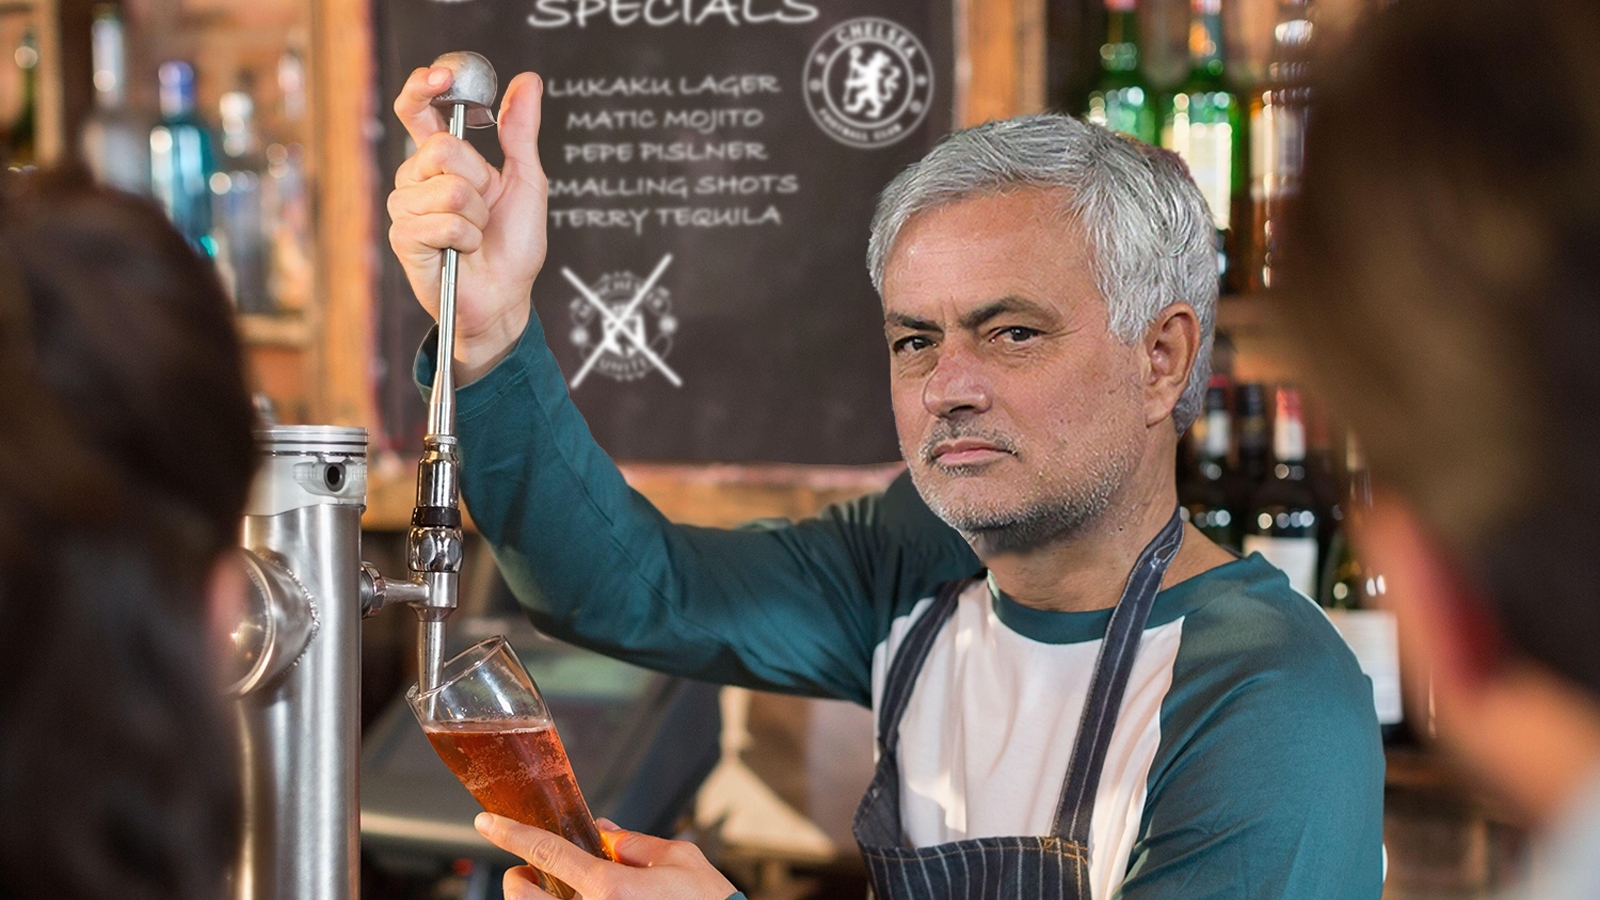 6 alternative careers for jose mourinho if he retired from football management